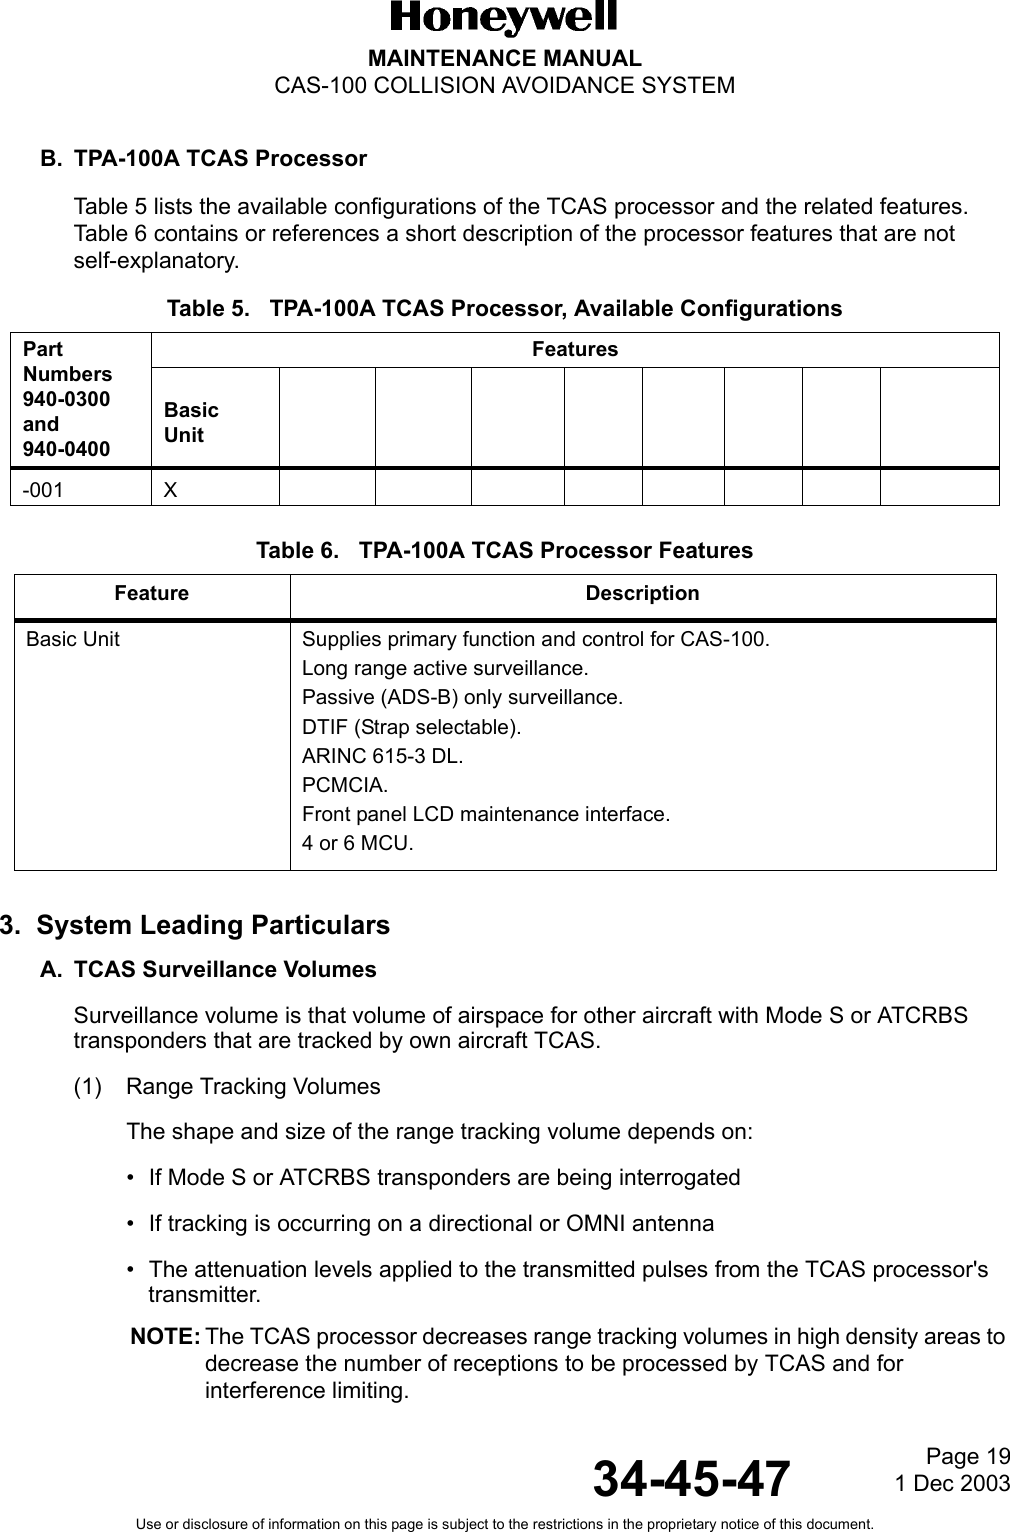 Page 19  1 Dec 200334-45-47MAINTENANCE MANUALCAS-100 COLLISION AVOIDANCE SYSTEMUse or disclosure of information on this page is subject to the restrictions in the proprietary notice of this document.B. TPA-100A TCAS ProcessorTable 5 lists the available configurations of the TCAS processor and the related features.  Table 6 contains or references a short description of the processor features that are not self-explanatory.Table 5.   TPA-100A TCAS Processor, Available ConfigurationsTable 6.   TPA-100A TCAS Processor Features3.  System Leading ParticularsA. TCAS Surveillance VolumesSurveillance volume is that volume of airspace for other aircraft with Mode S or ATCRBS transponders that are tracked by own aircraft TCAS.(1) Range Tracking VolumesThe shape and size of the range tracking volume depends on:• If Mode S or ATCRBS transponders are being interrogated• If tracking is occurring on a directional or OMNI antenna • The attenuation levels applied to the transmitted pulses from the TCAS processor&apos;s transmitter.NOTE: The TCAS processor decreases range tracking volumes in high density areas to decrease the number of receptions to be processed by TCAS and for interference limiting.PartNumbers940-0300 and940-0400FeaturesBasicUnit-001 XFeature DescriptionBasic Unit  Supplies primary function and control for CAS-100. Long range active surveillance.Passive (ADS-B) only surveillance.DTIF (Strap selectable).ARINC 615-3 DL.PCMCIA.Front panel LCD maintenance interface.4 or 6 MCU.